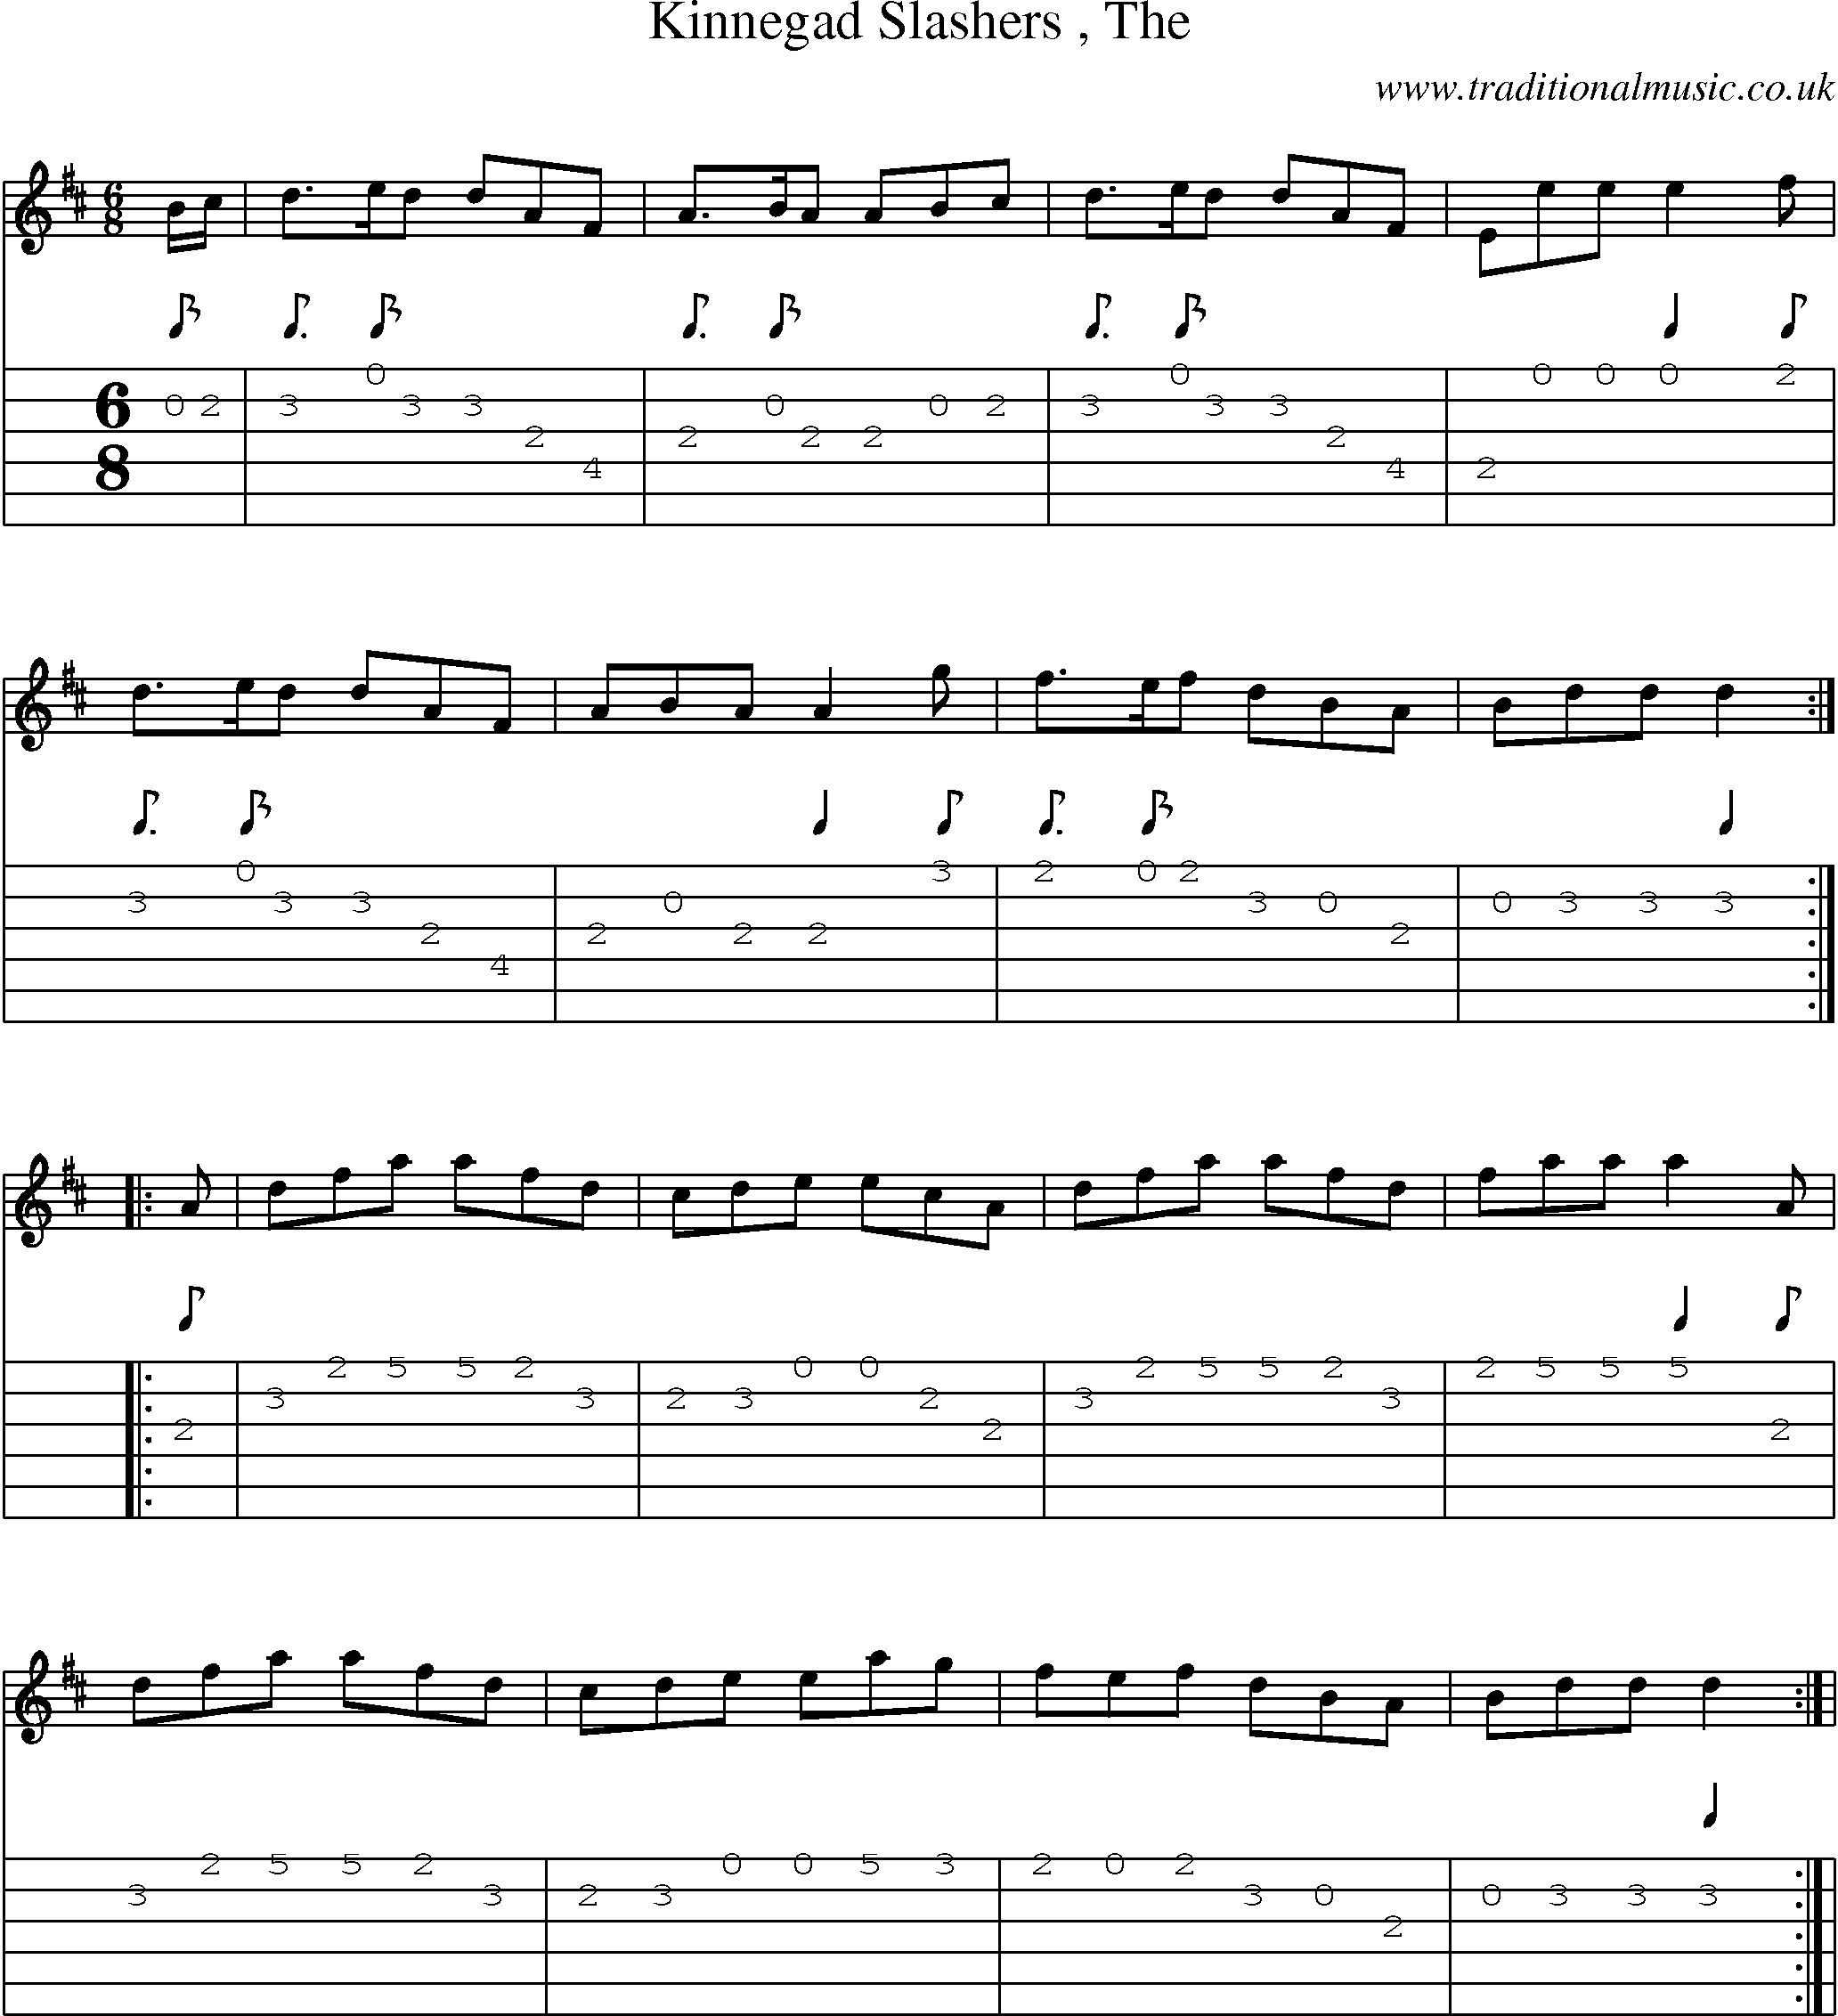 Music Score and Guitar Tabs for Kinnegad Slashers